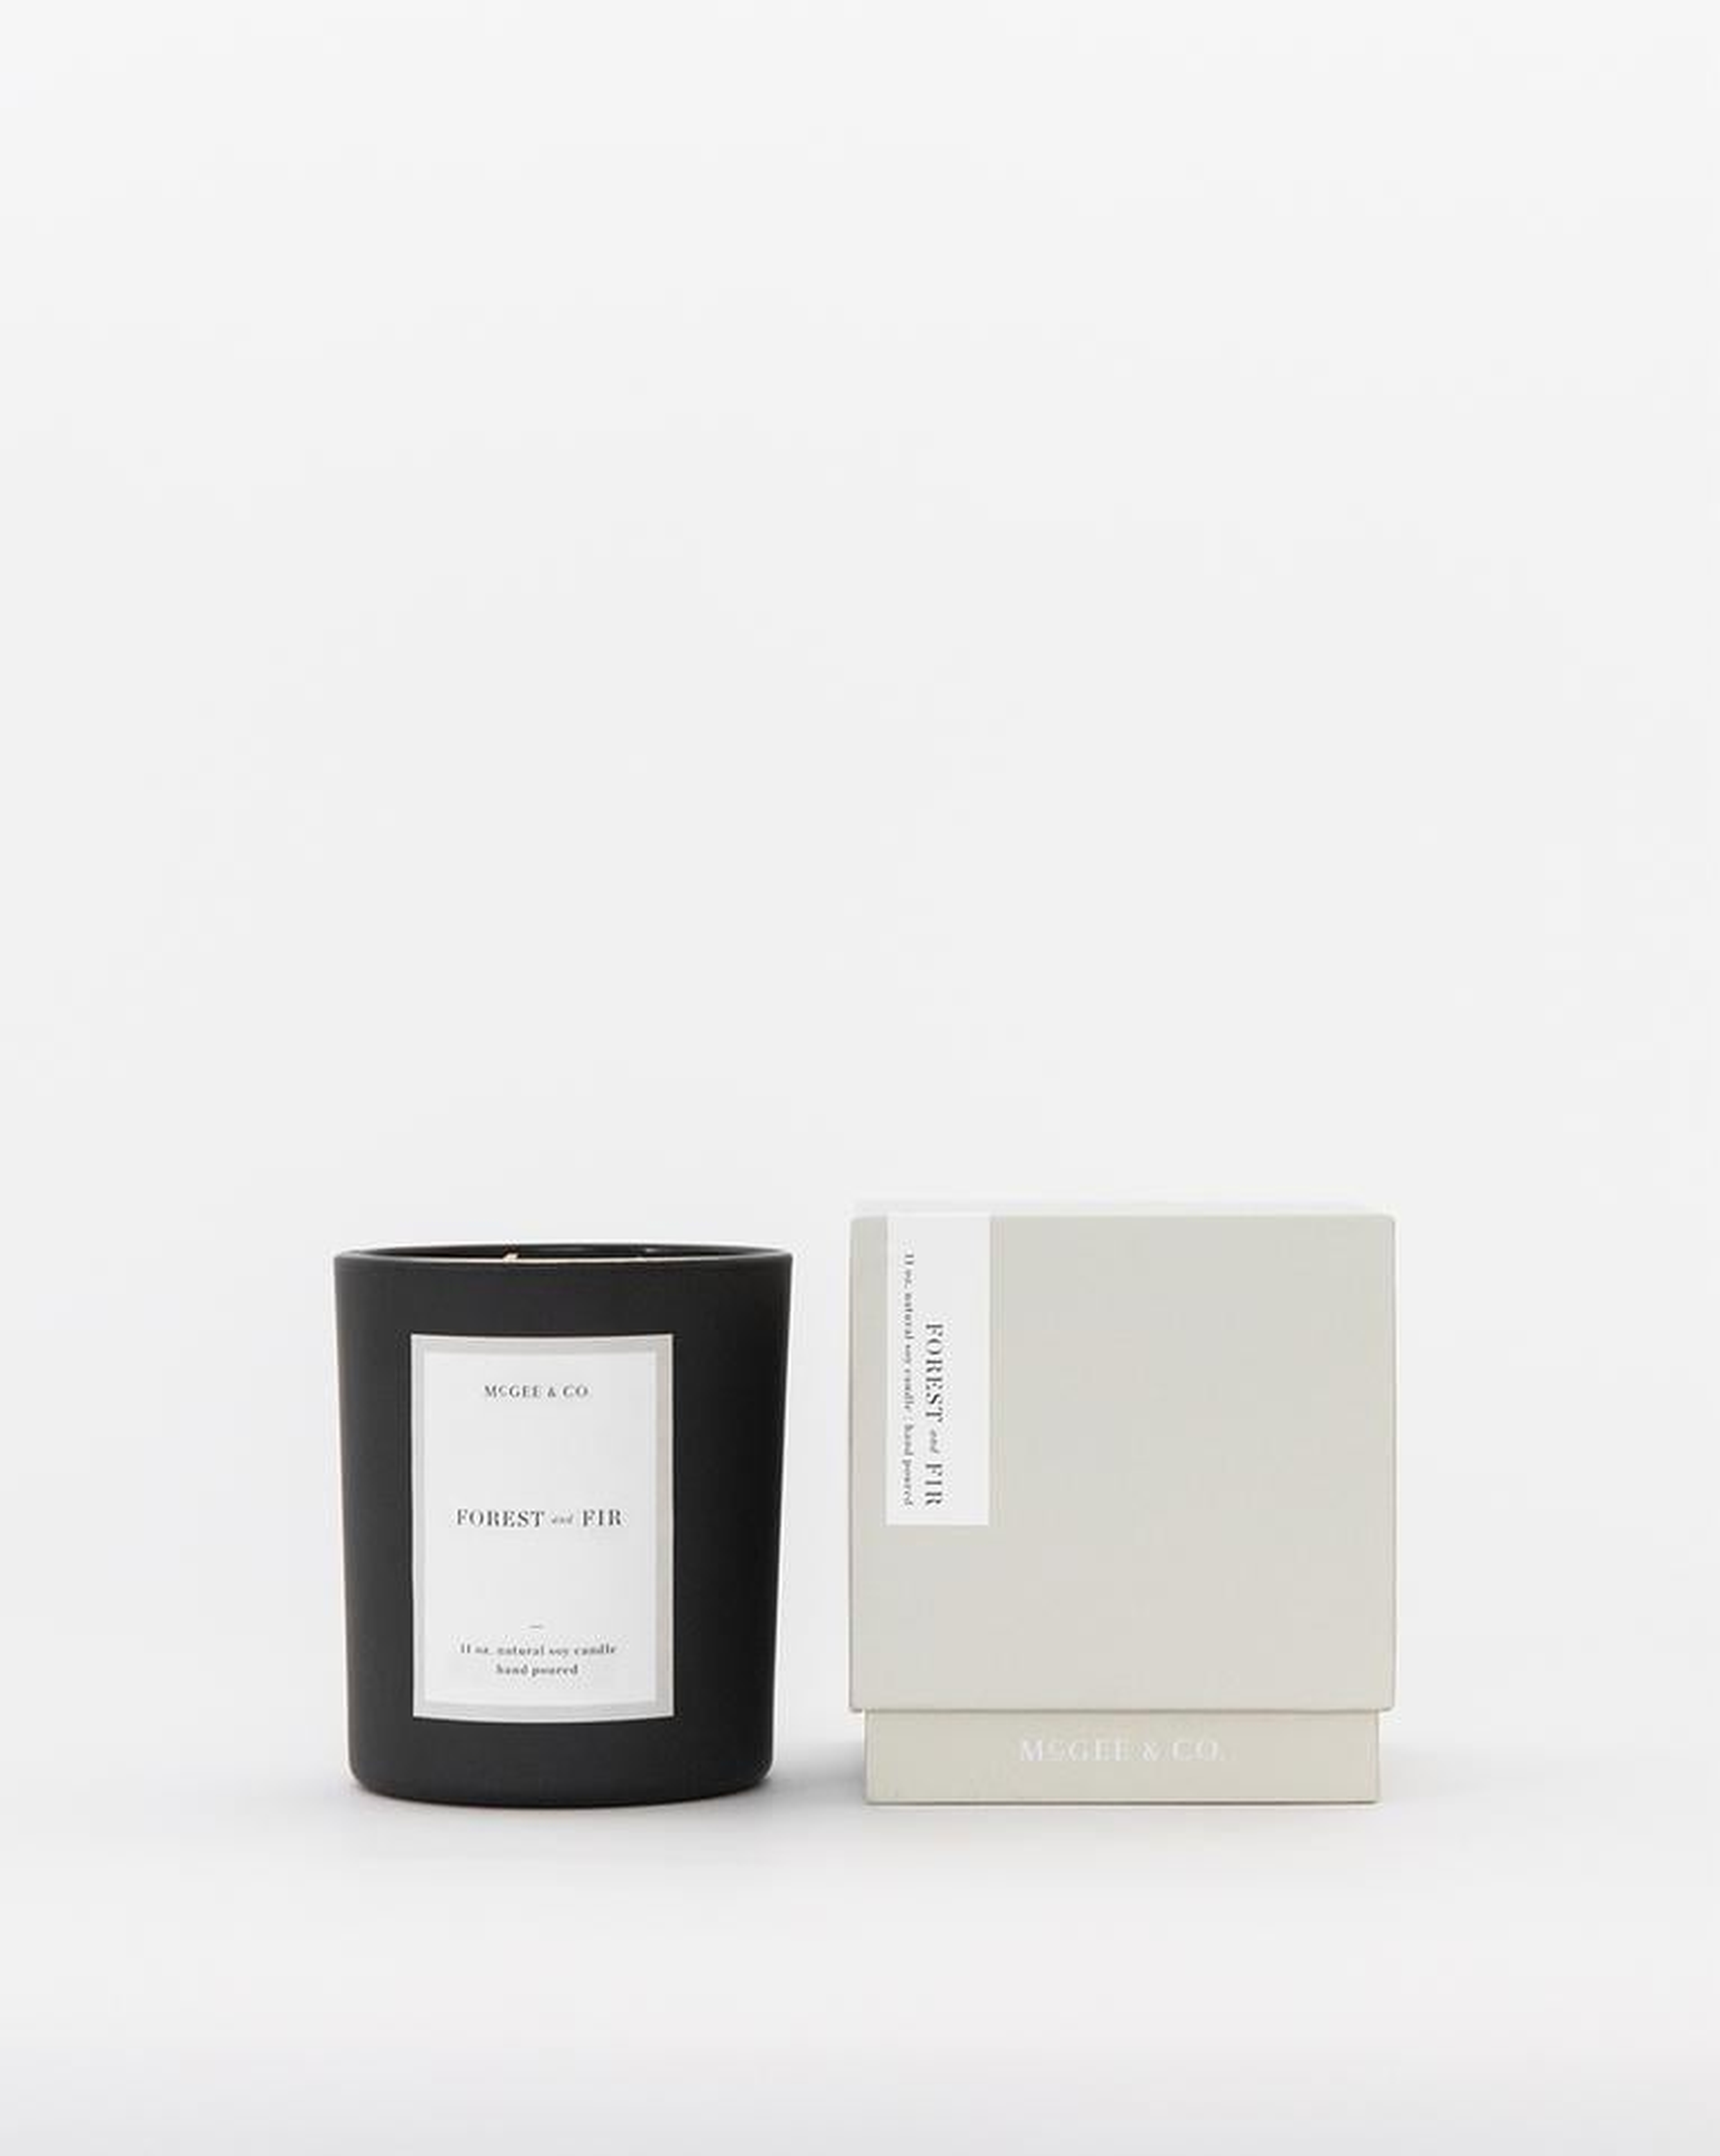 FOREST + FIR CANDLE - McGee & Co.